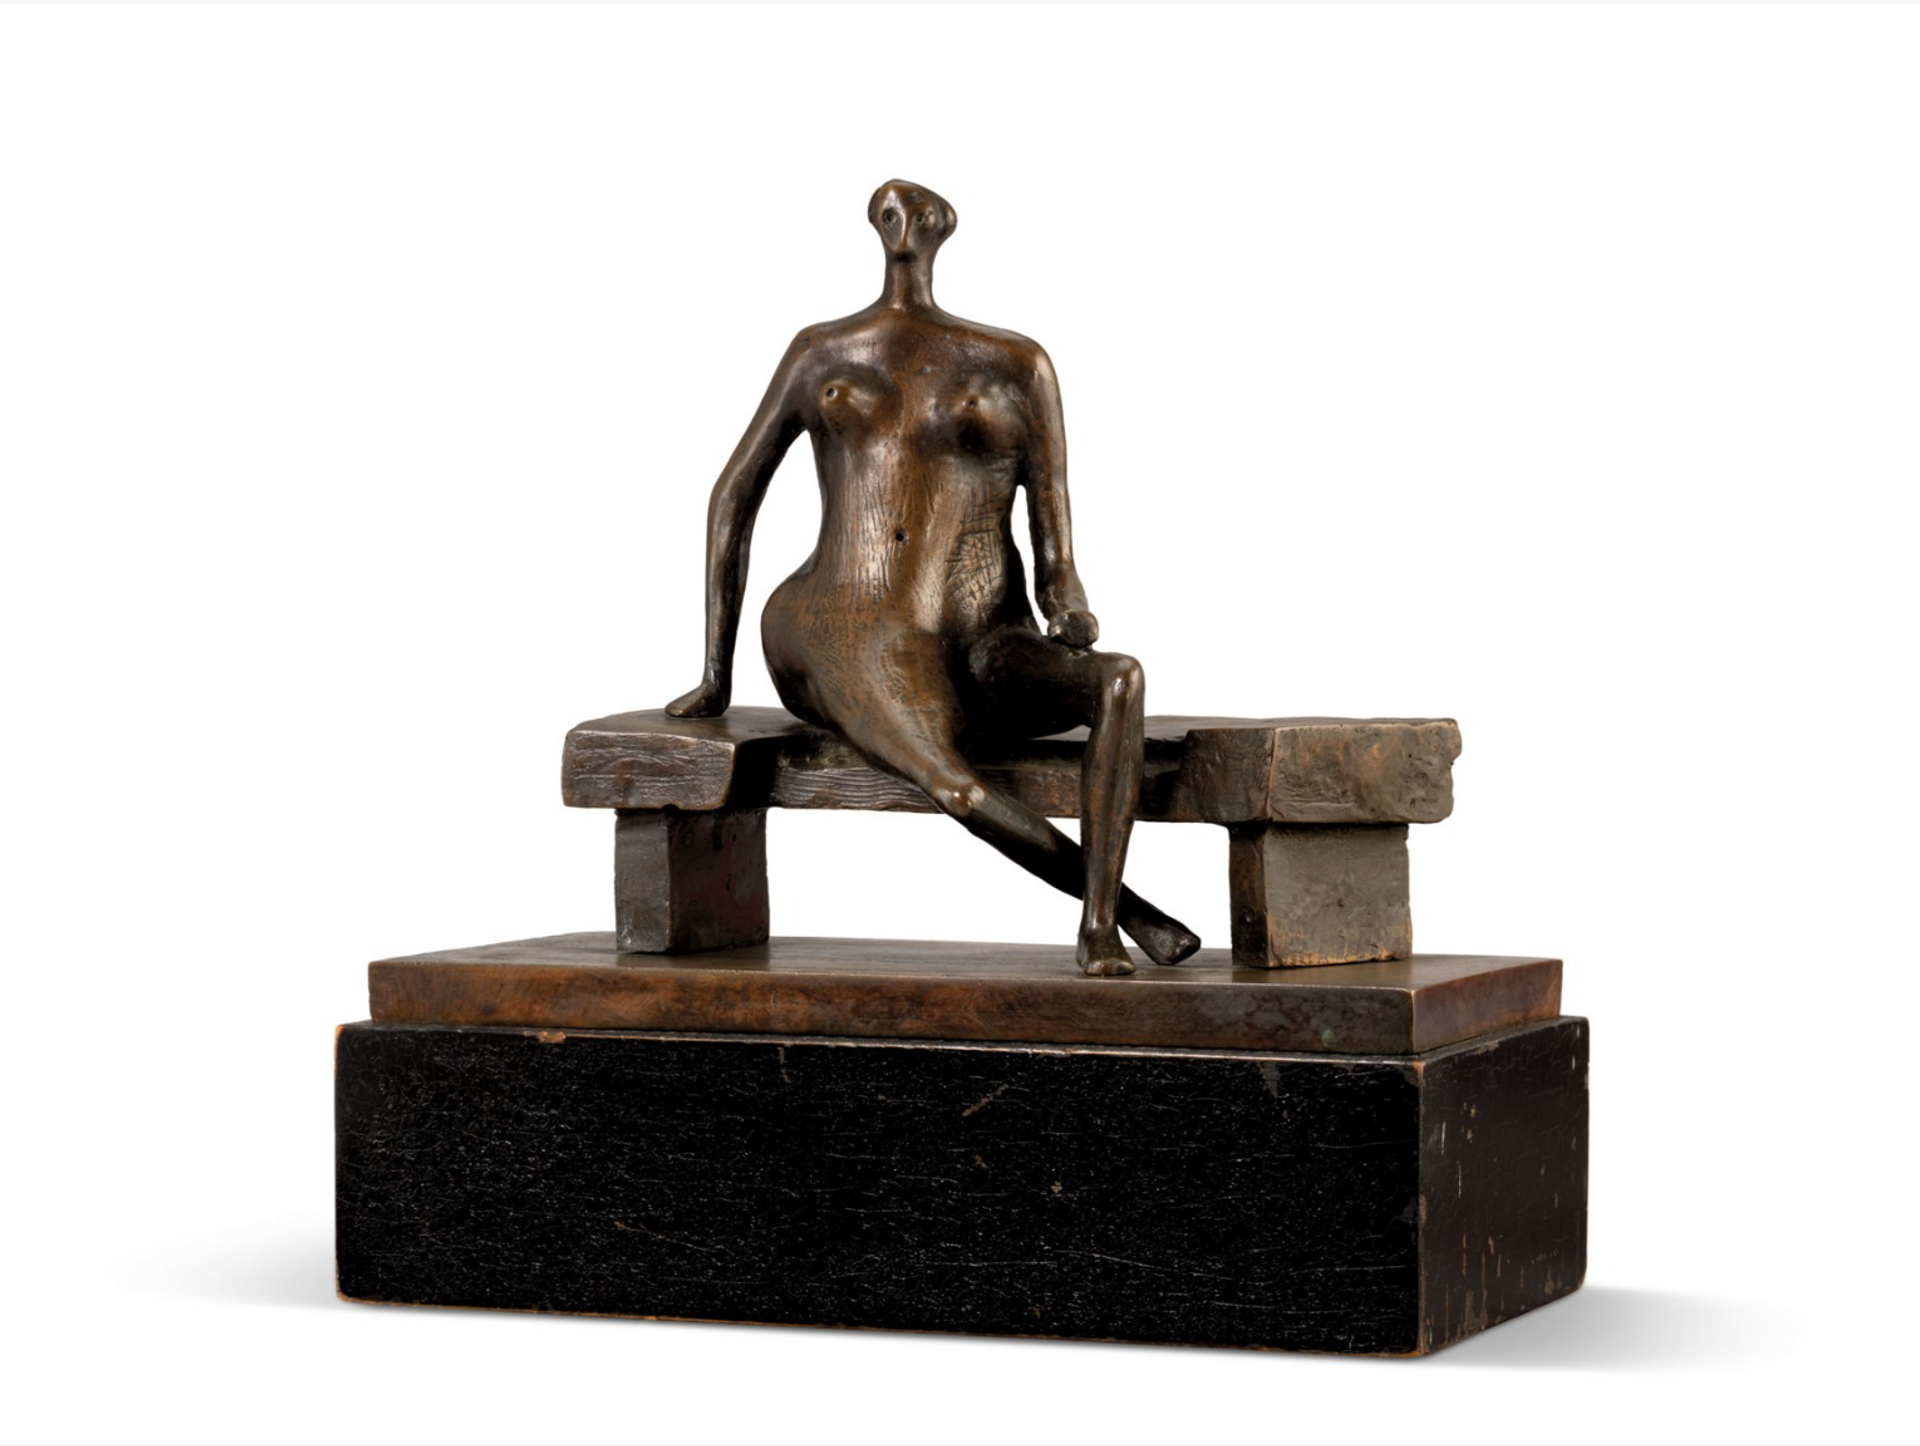 A seated woman sculpture with a loosely abstracted figural form. Her legs are crossed, and her breasts are accentuated as she sits on a bench placed on a rectangular plinth.